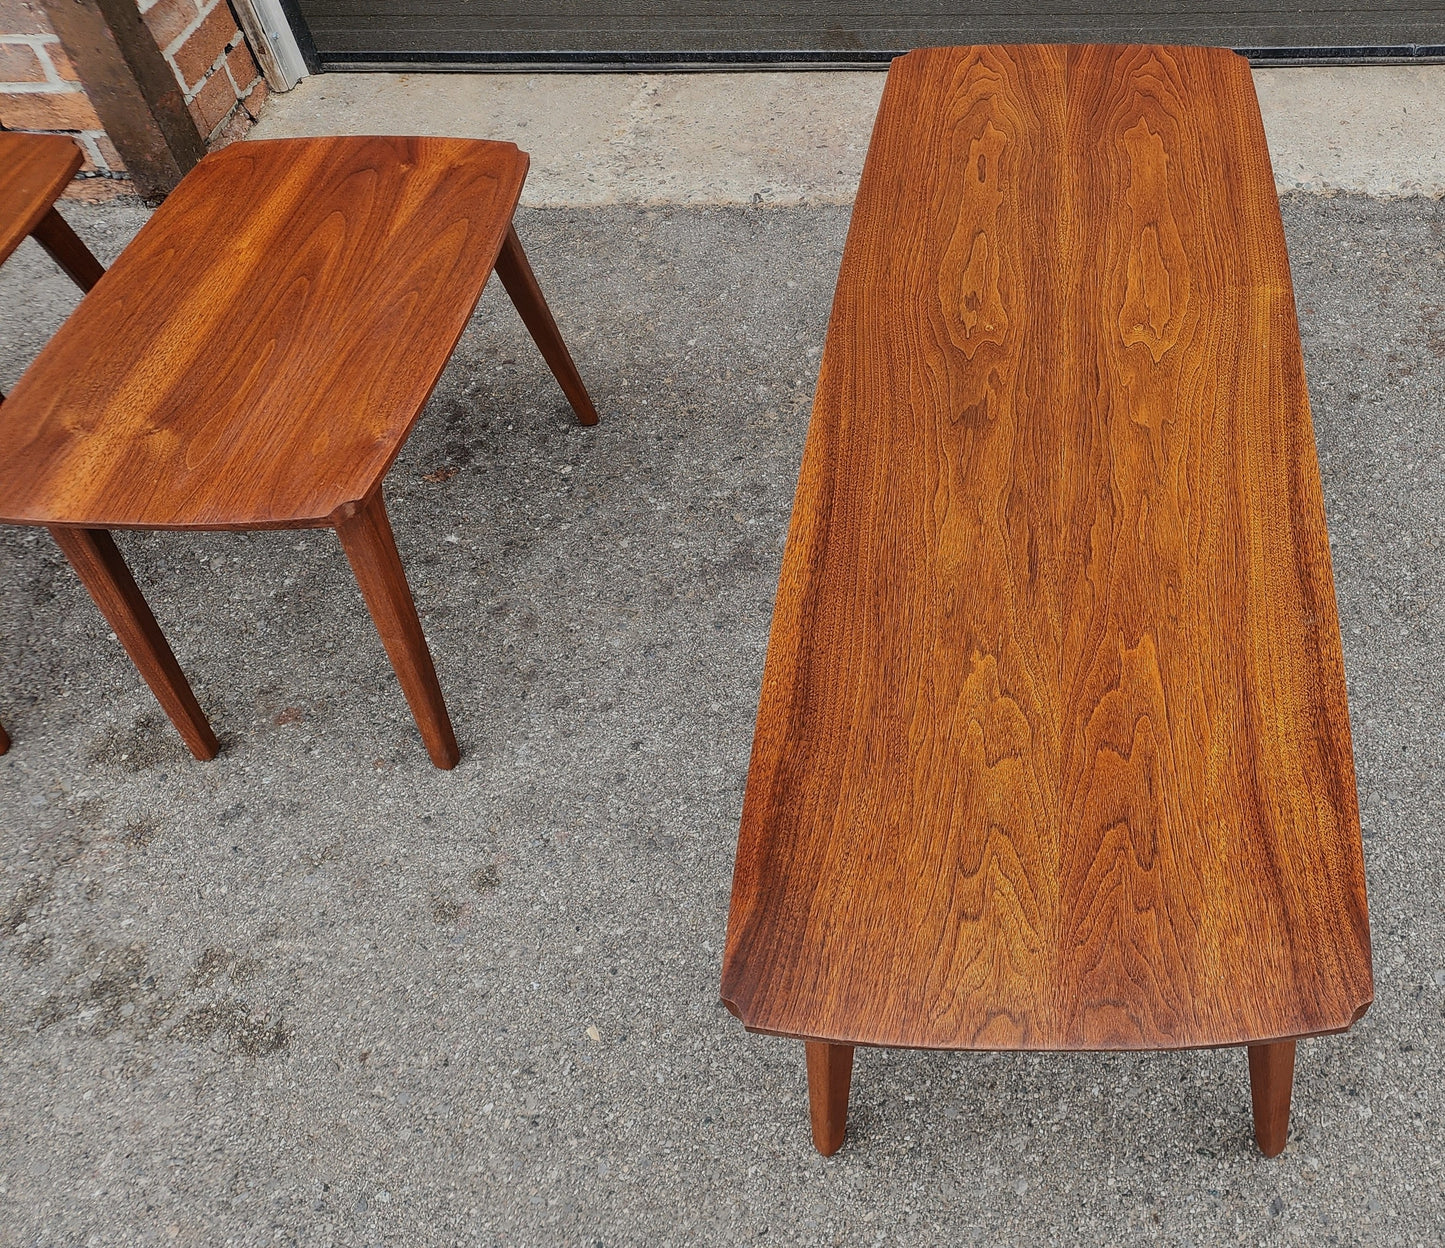 REFINISHED Mid Century Modern Solid Walnut Coffee Table & 2 End Tables